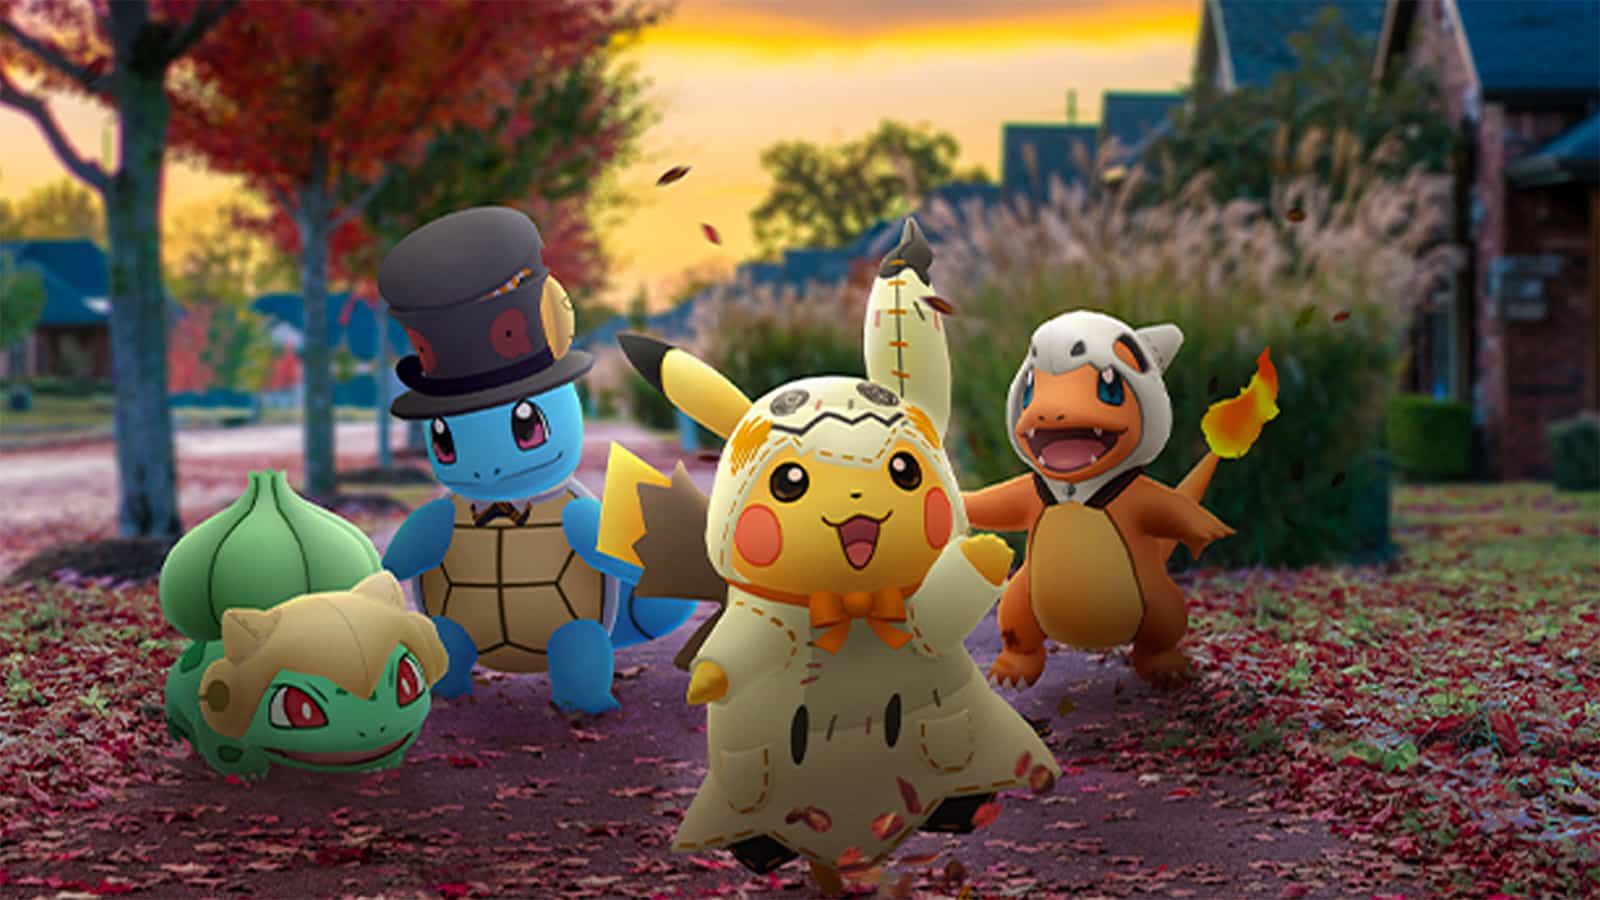 Bulbasaur, Squirtle, Pikachu, and Charmander wearing Halloween costumes in Pokemon Go